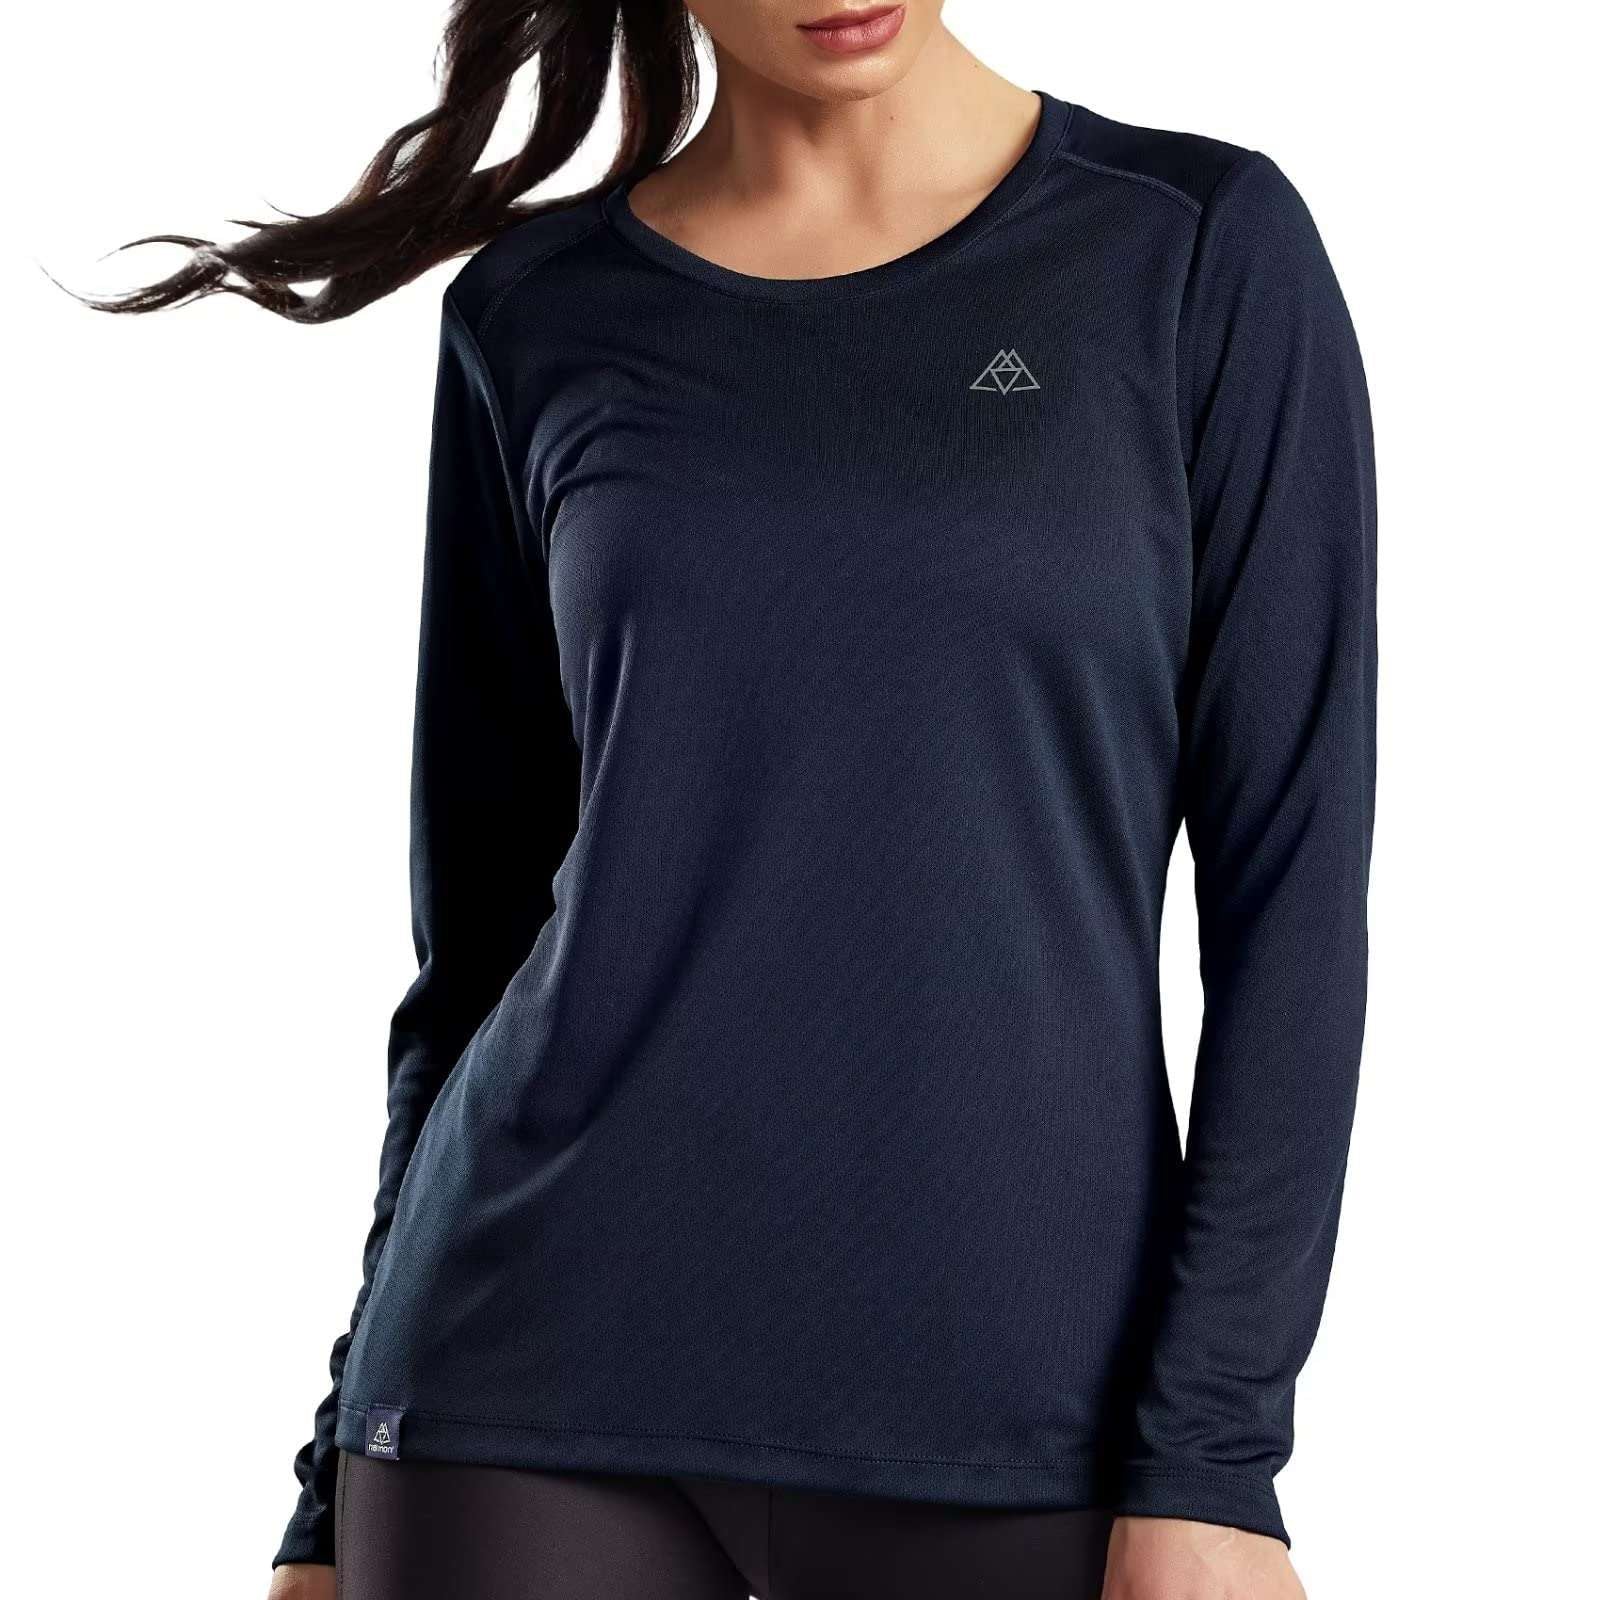 Haimont Women's Athletic T-Shirts Long Sleeve Active Tops